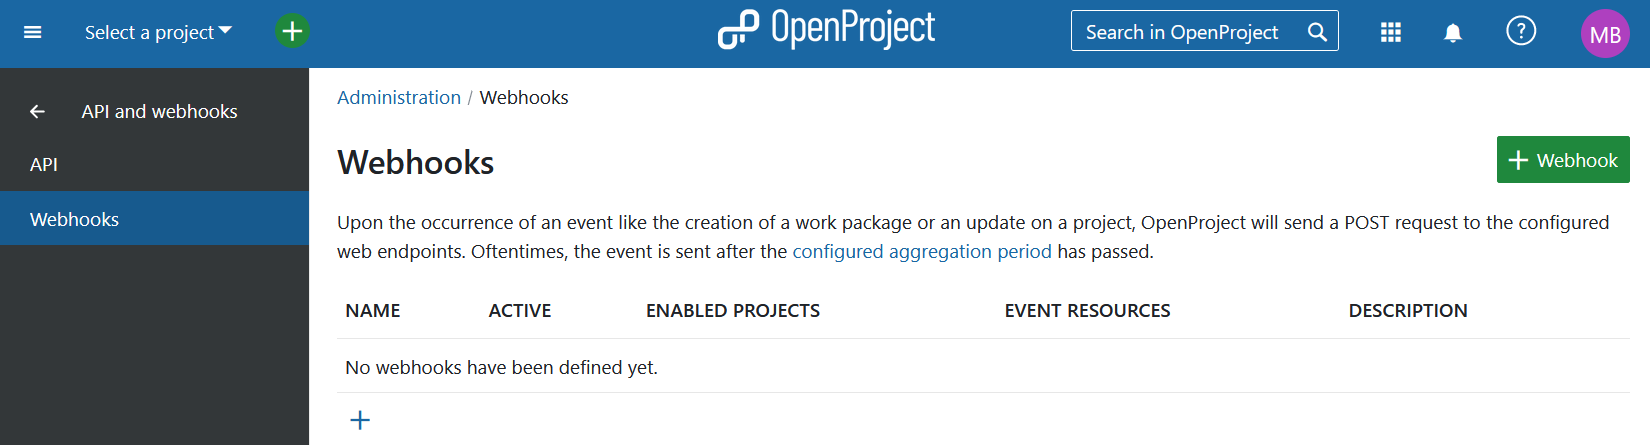 Add a new webhook in OpenProject administration